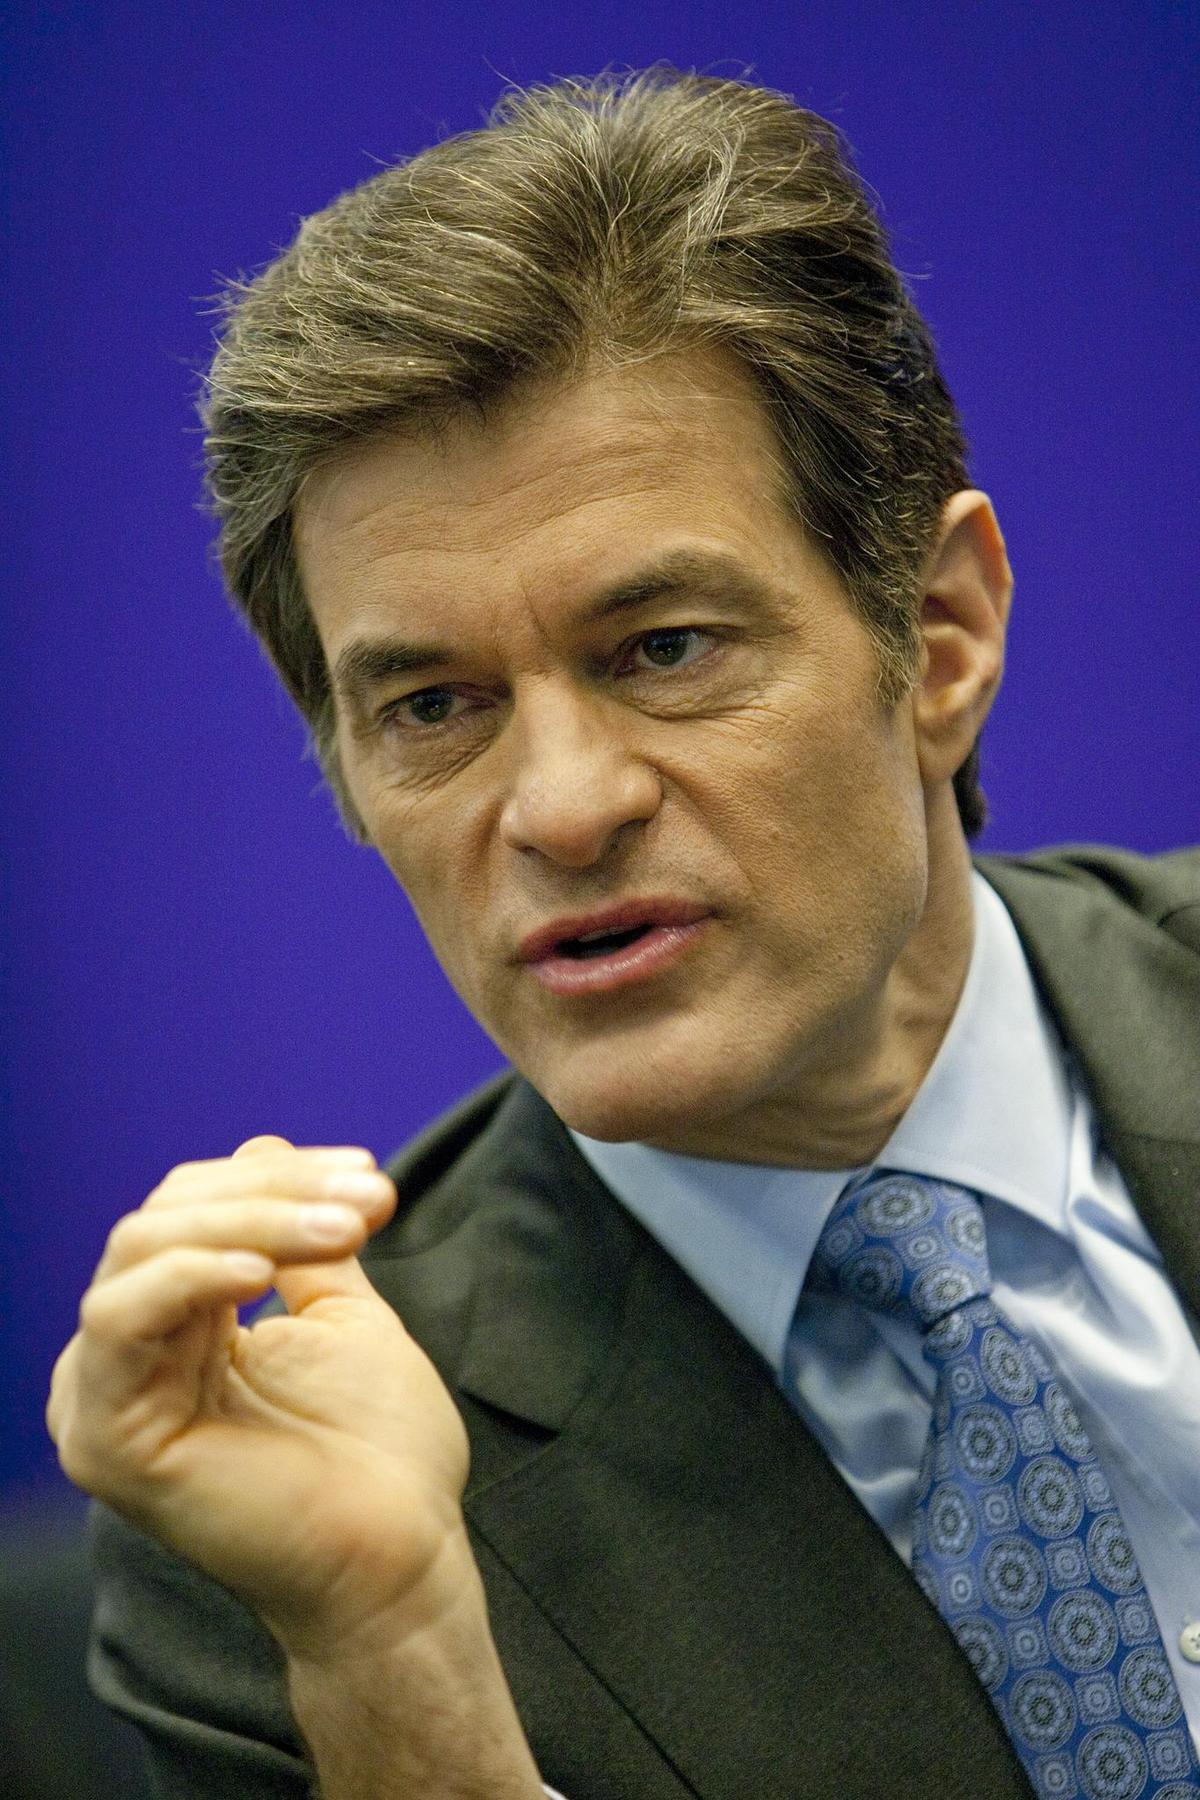 Dr. Oz to testify in Medtronic heart valve fight - Minneapolis / St